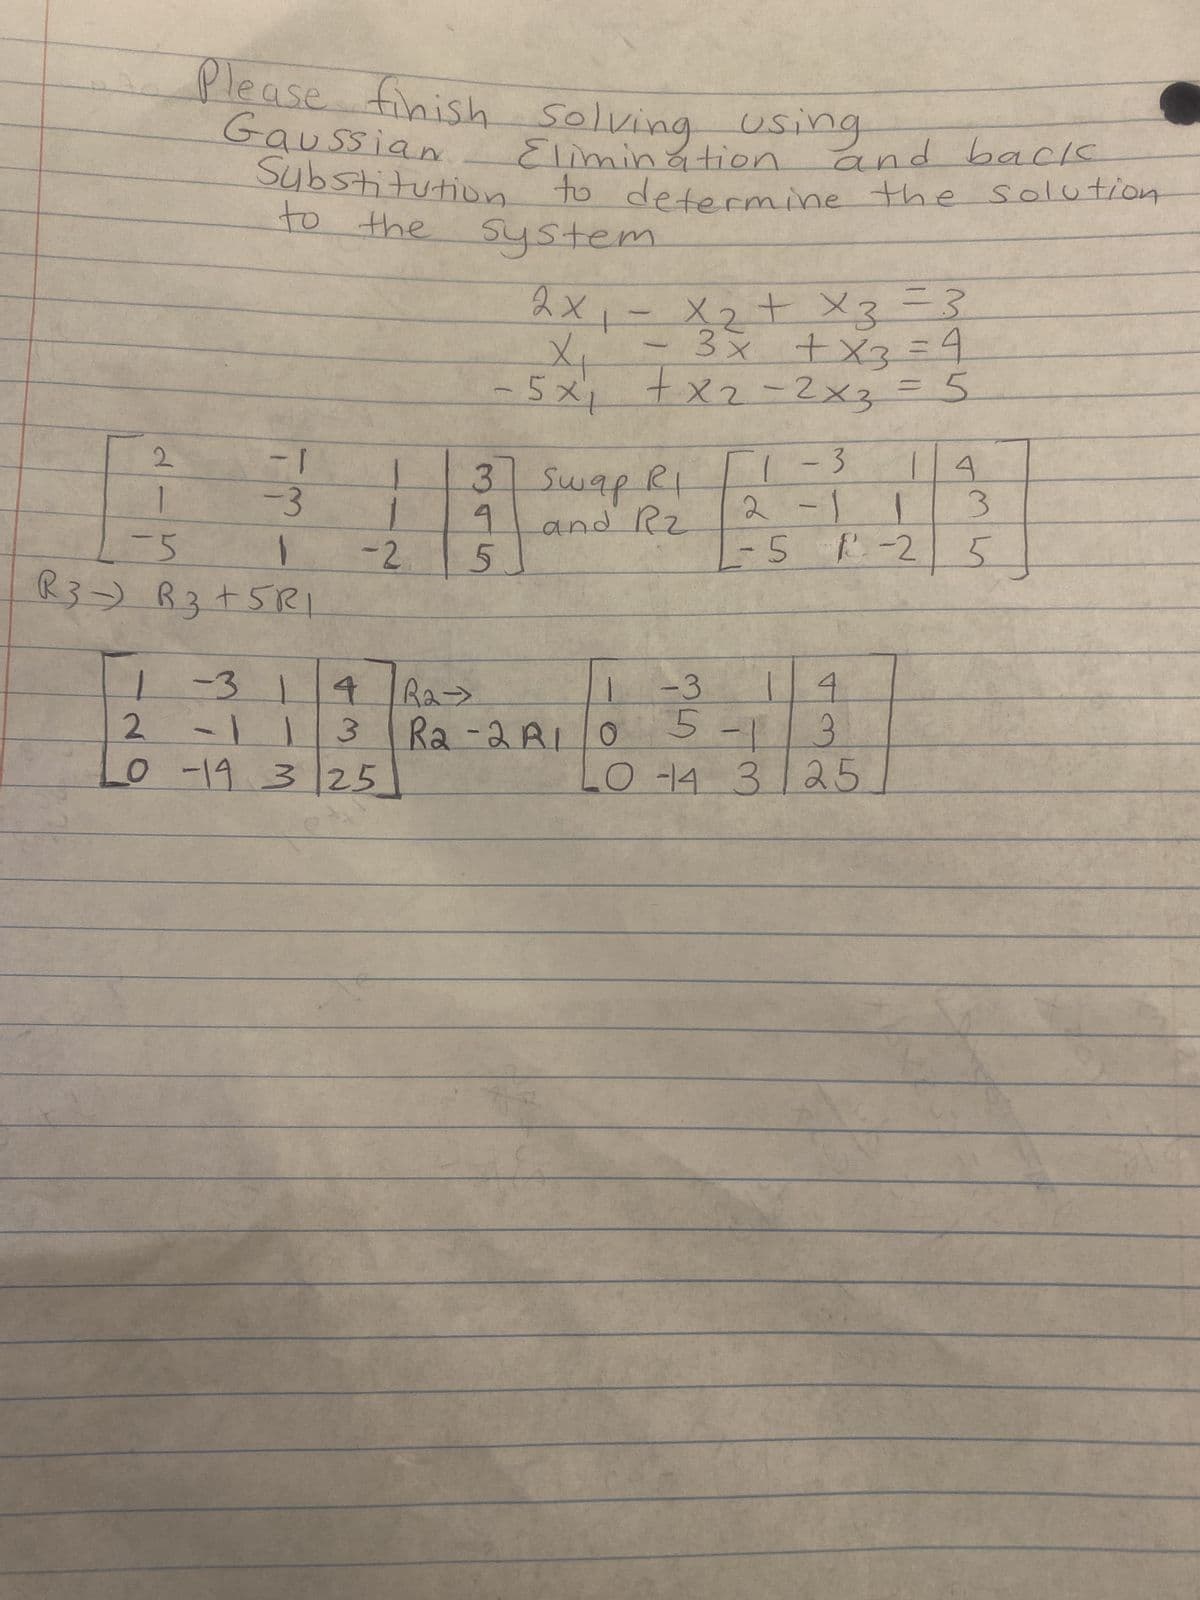 2
1
-5
Please finish
and back
Gaussian
Substitution to determine the solution
to the
system
finish solving using
Elimination.
- 1
-3
1
R3 R3+5RI
1
1-314
2 -11 3
0 -19 3 25
-
2х
2x₁ = x₂ + x3 = 3
- 3x + x3 = 4
+x2=2x3 = 5
3 Swap RI
9
and Rz
-2 5
1
X₁
- 5x1
1-3
1-3
2-1
R₂-
R₂-2 R10
14
5-1 3
04 3/25
14
L
-5 1²-25
3